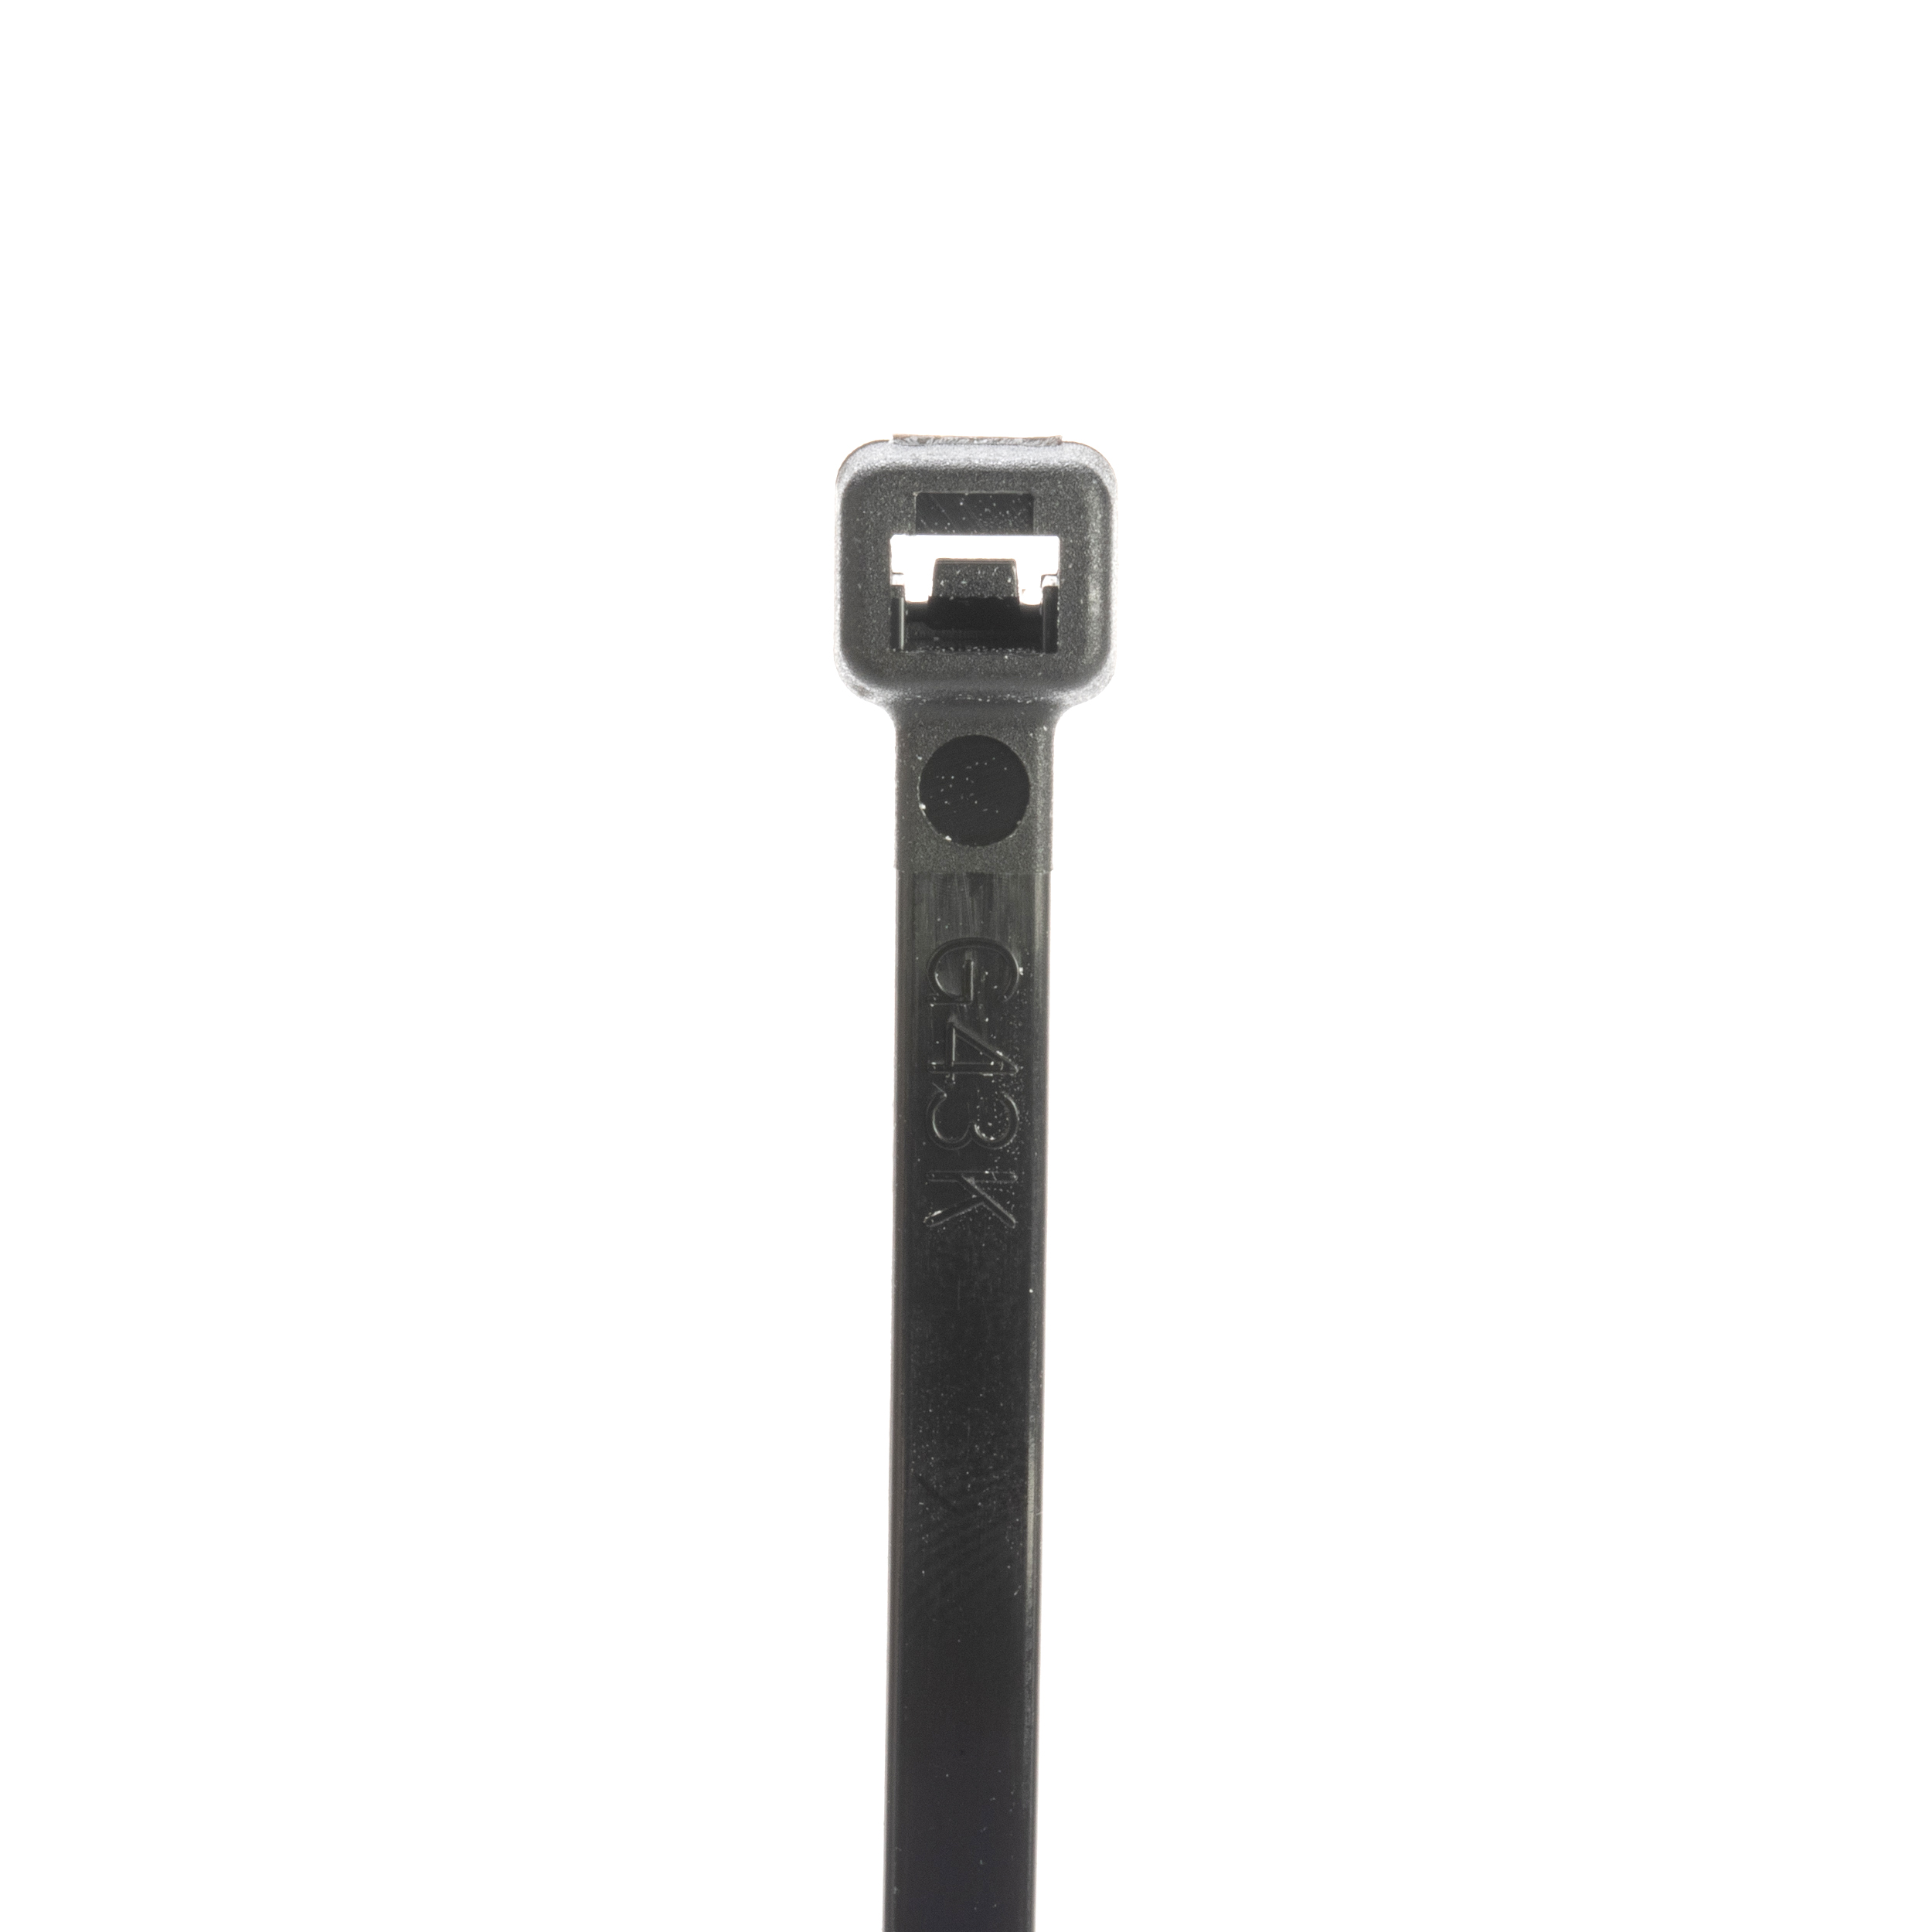 PAN S7-50-C0 7.4" CABLE TIE 50TS BLACK